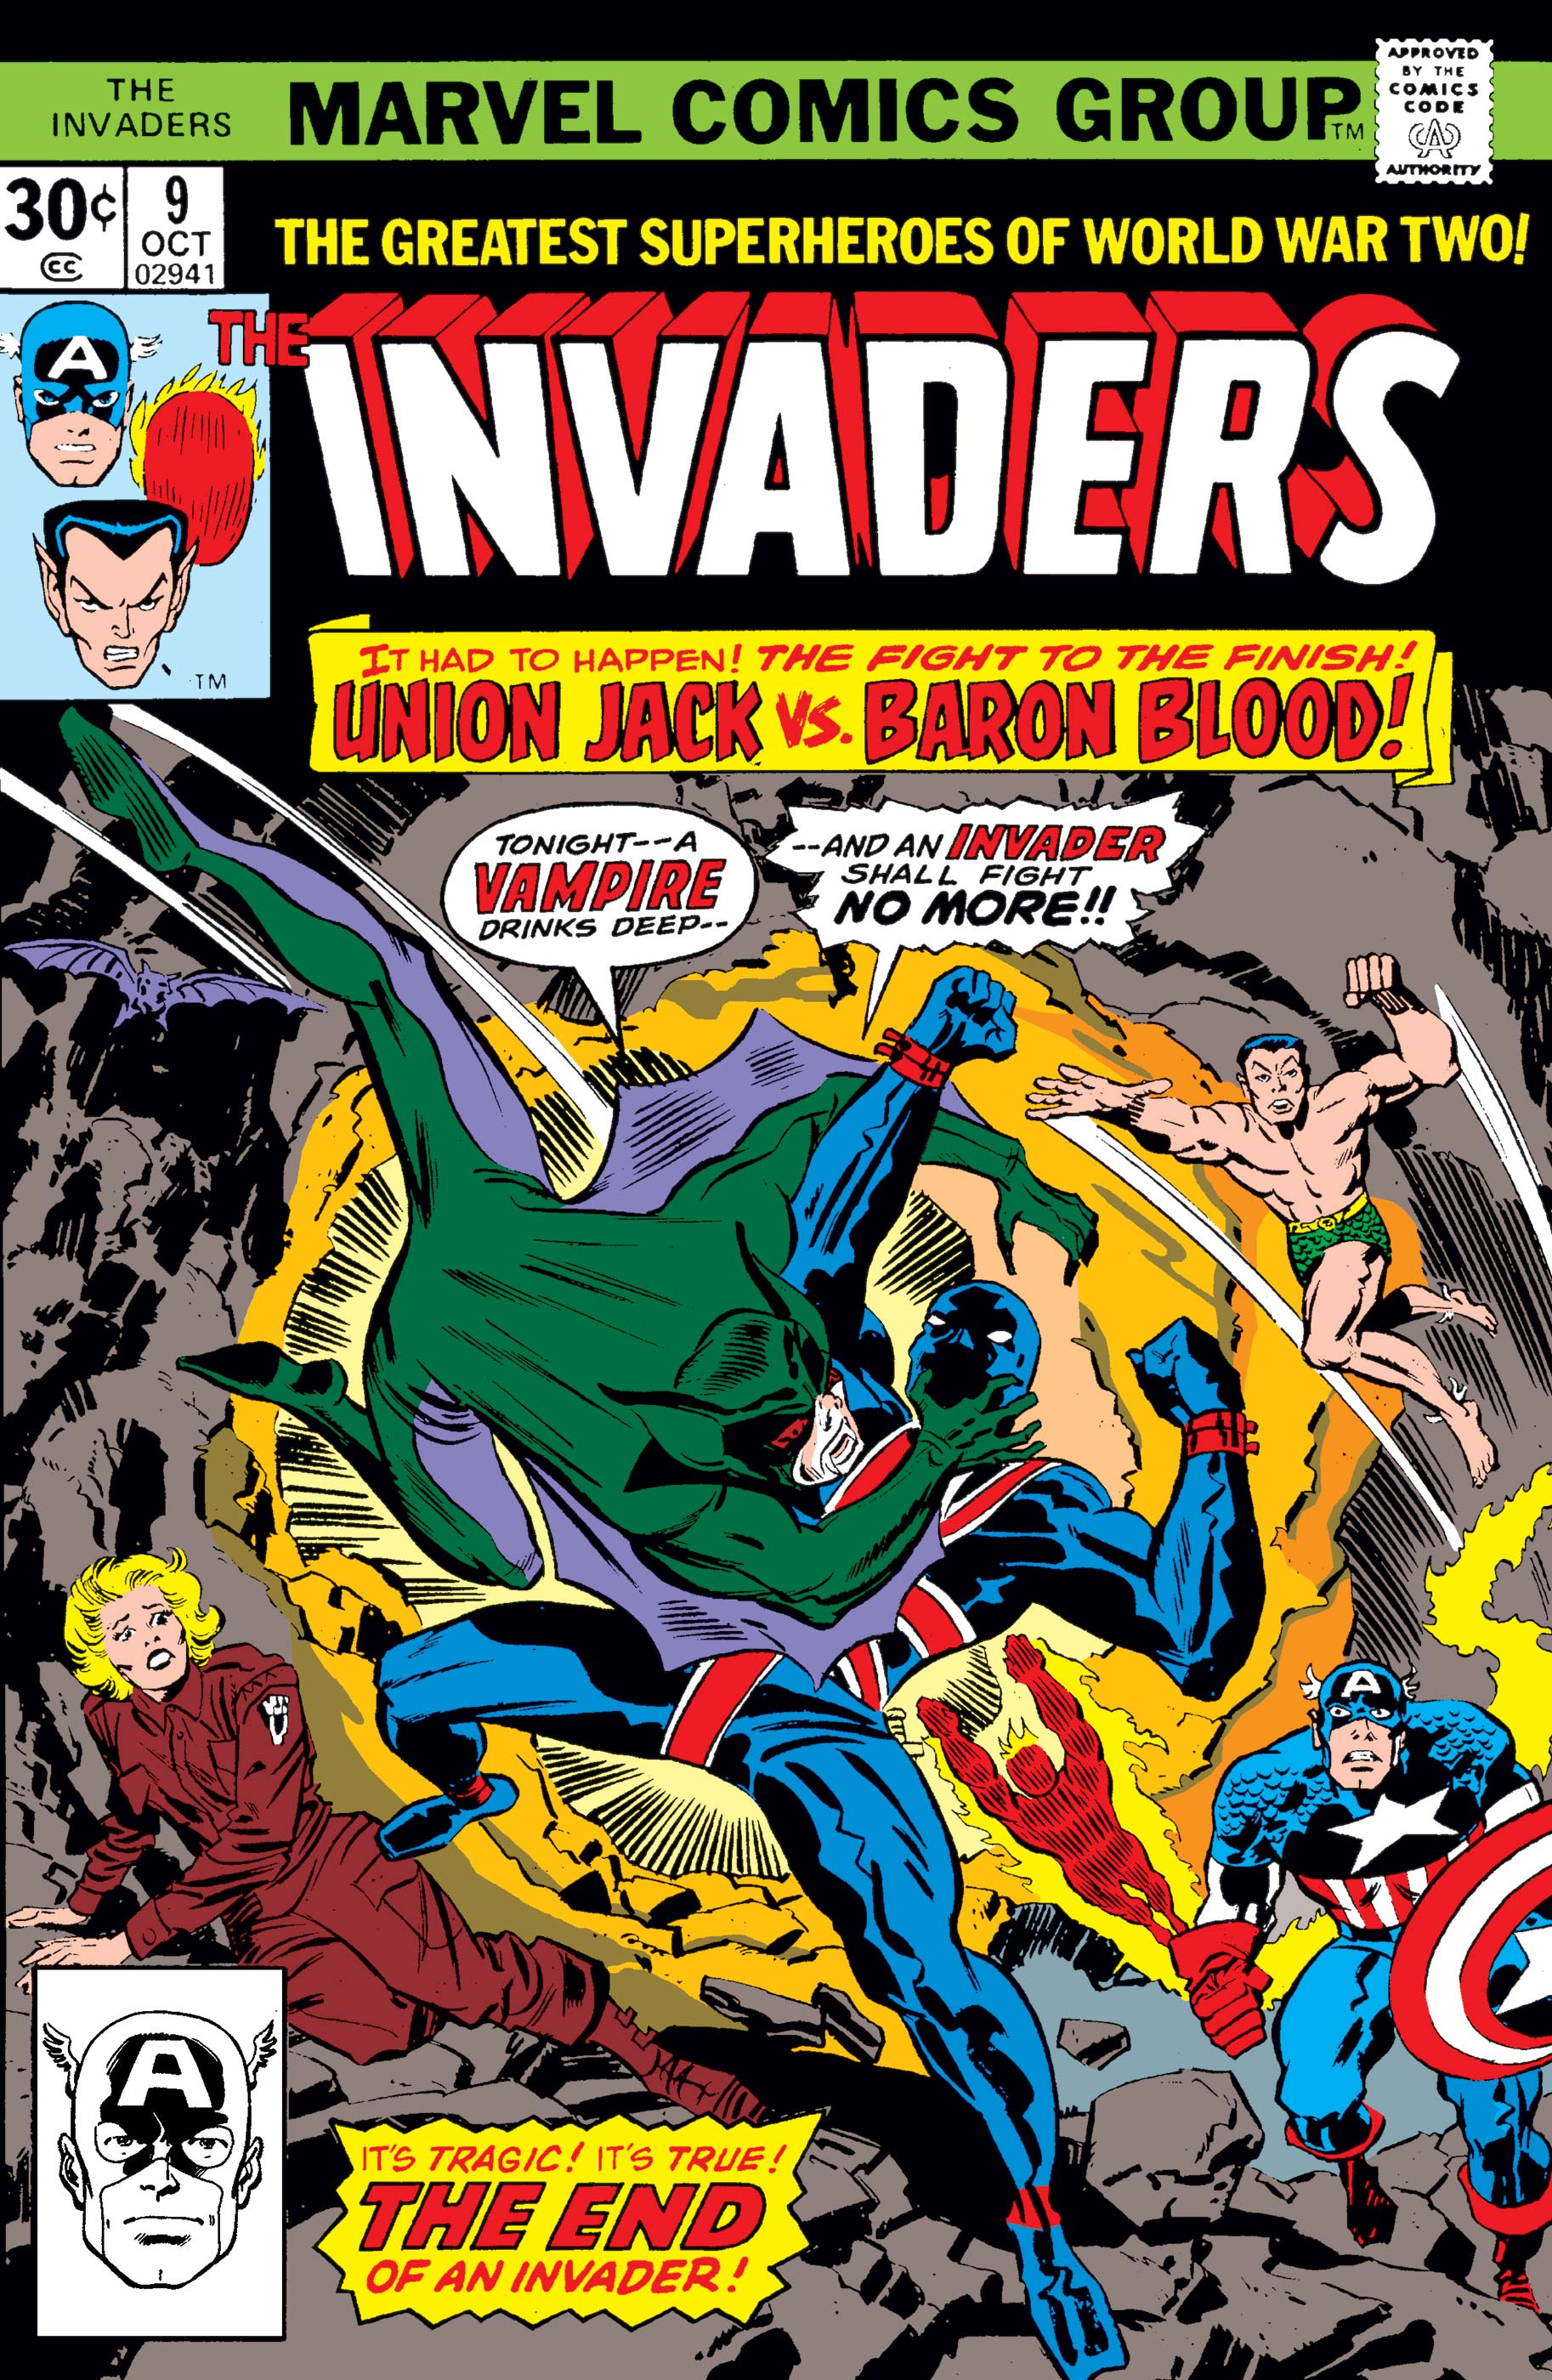 Invaders (1975) #9